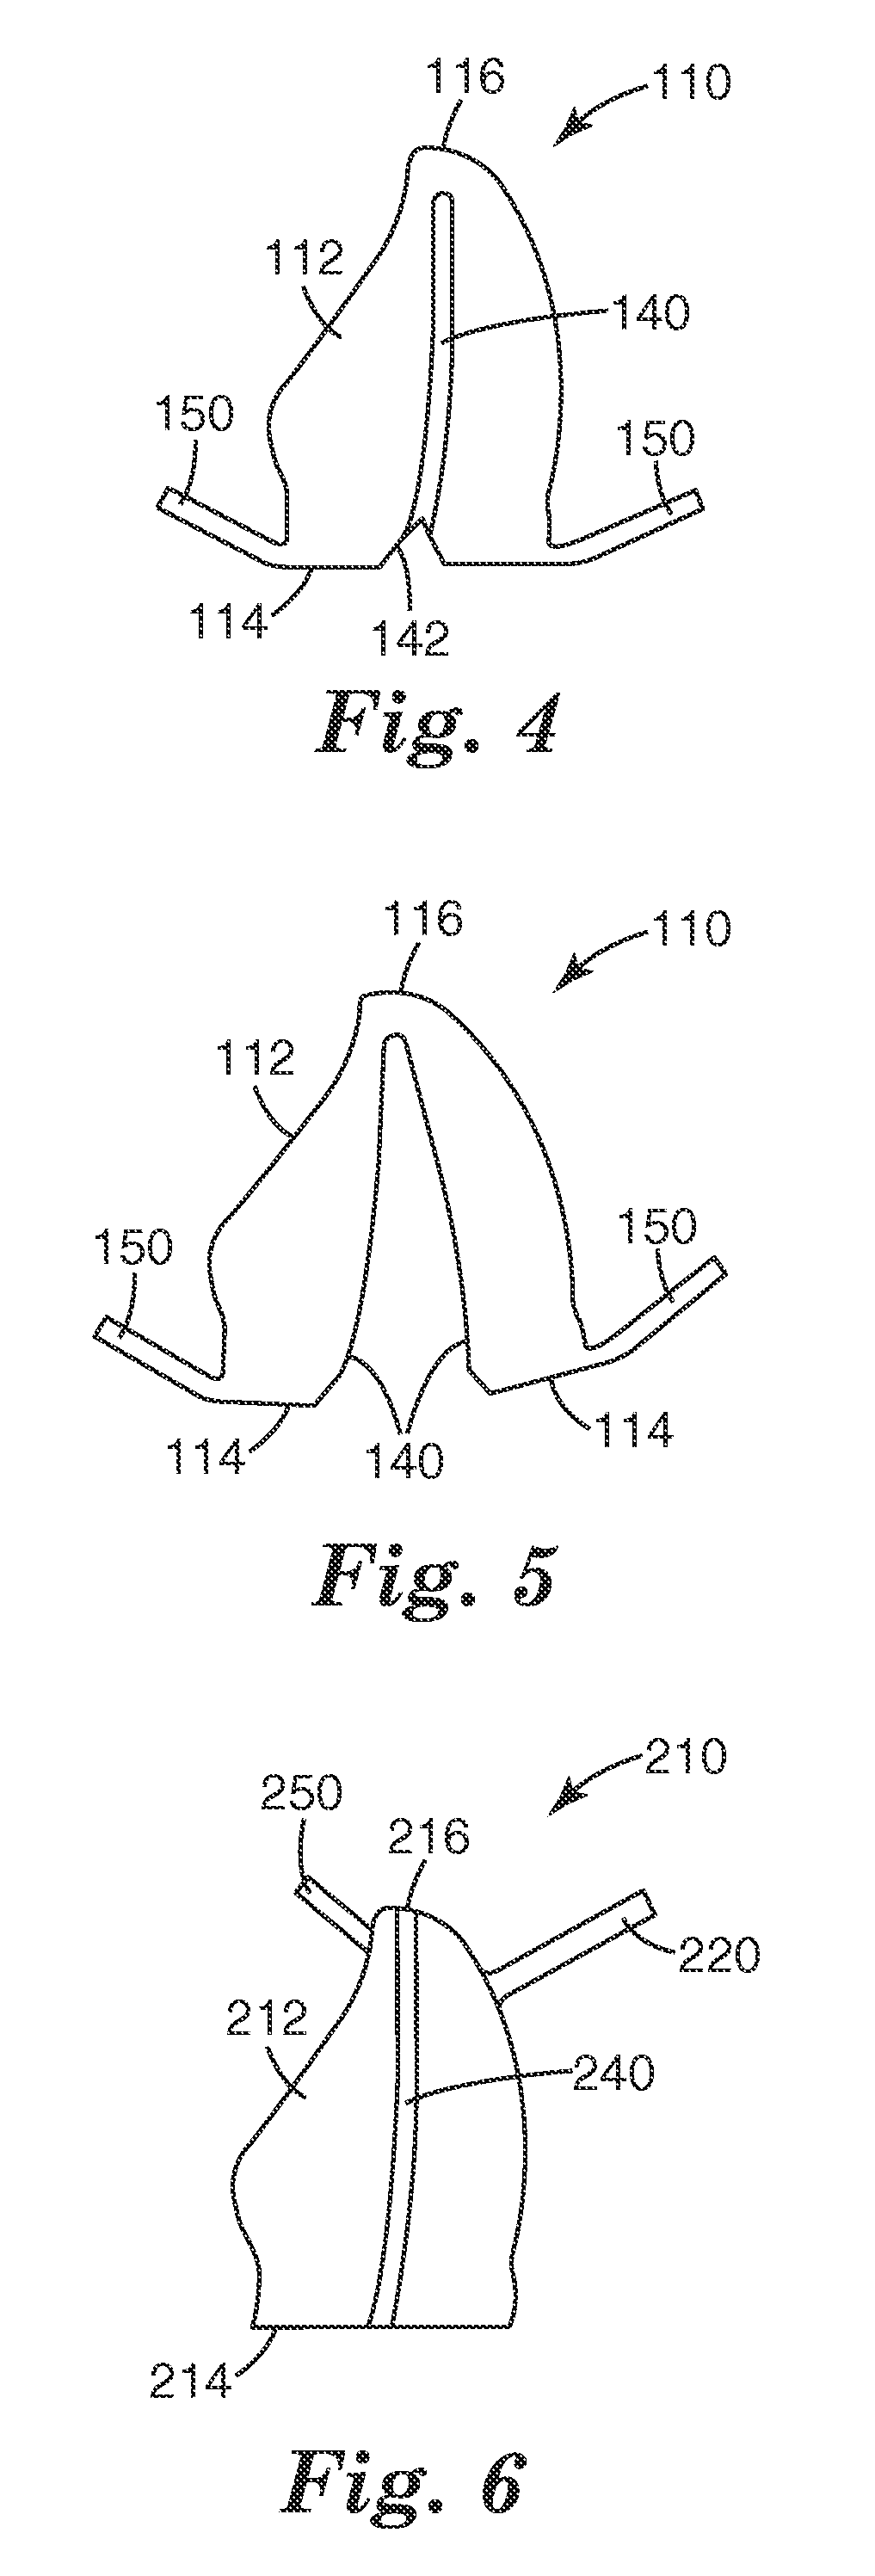 Dental crown forms and methods